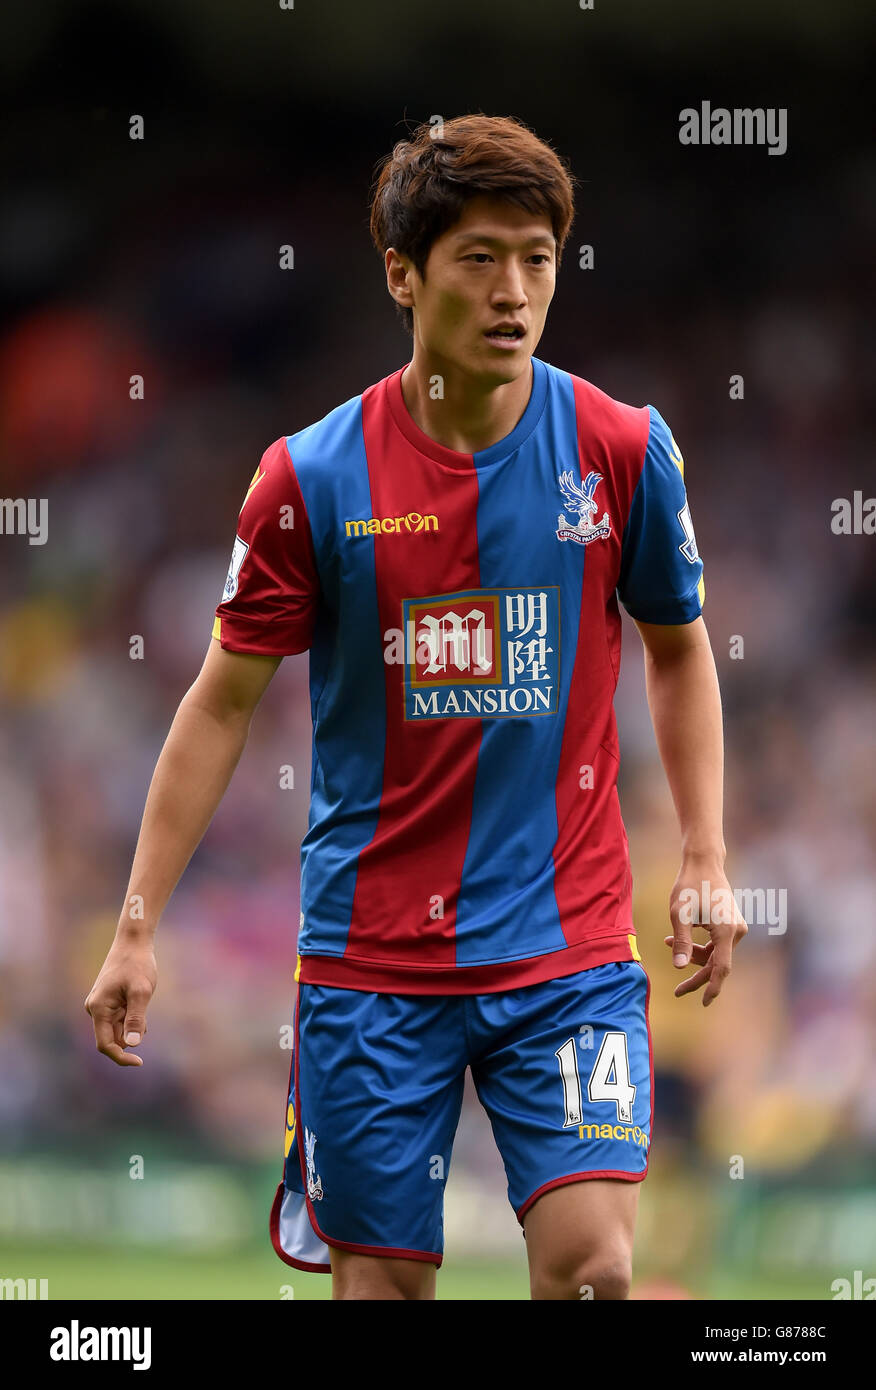 Crystal Palace's Lee Chung-Yong during the Barclays Premier League match at Selhurst Park, London. PRESS ASSOCIATION Photo. Picture date: Sunday August 16, 2015. See PA story SOCCER Palace. Photo credit should read: Adam Davy/PA Wire. . No use with unauthorised audio, video, data, fixture lists, club/league logos or 'live' services. Online in-match use limited to 45 images, no video emulation. No use in betting, games or single club/league/player publications. Stock Photo